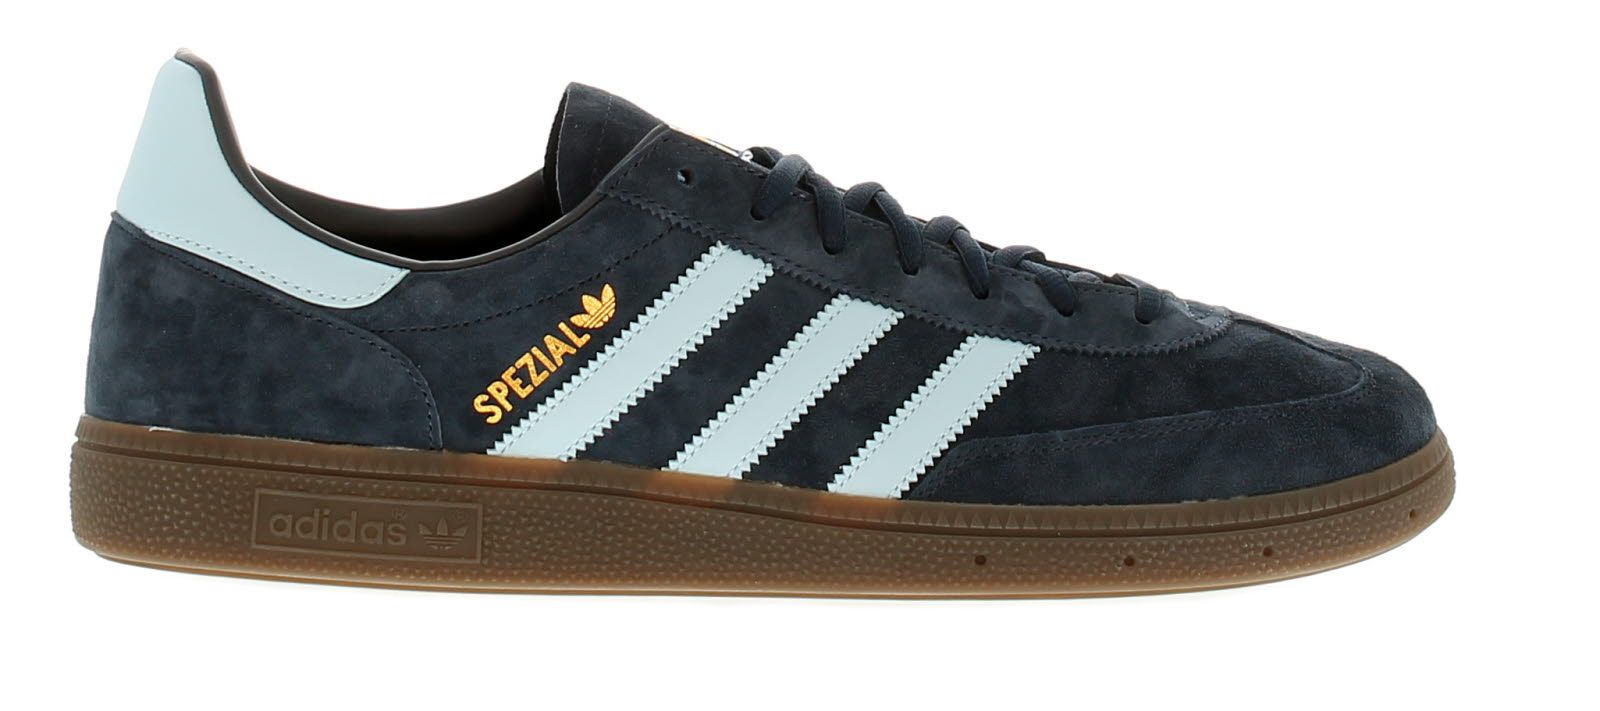 Mens adidas Handball Spezial Leather Upper Trainers Seven Eyelet Lace ...